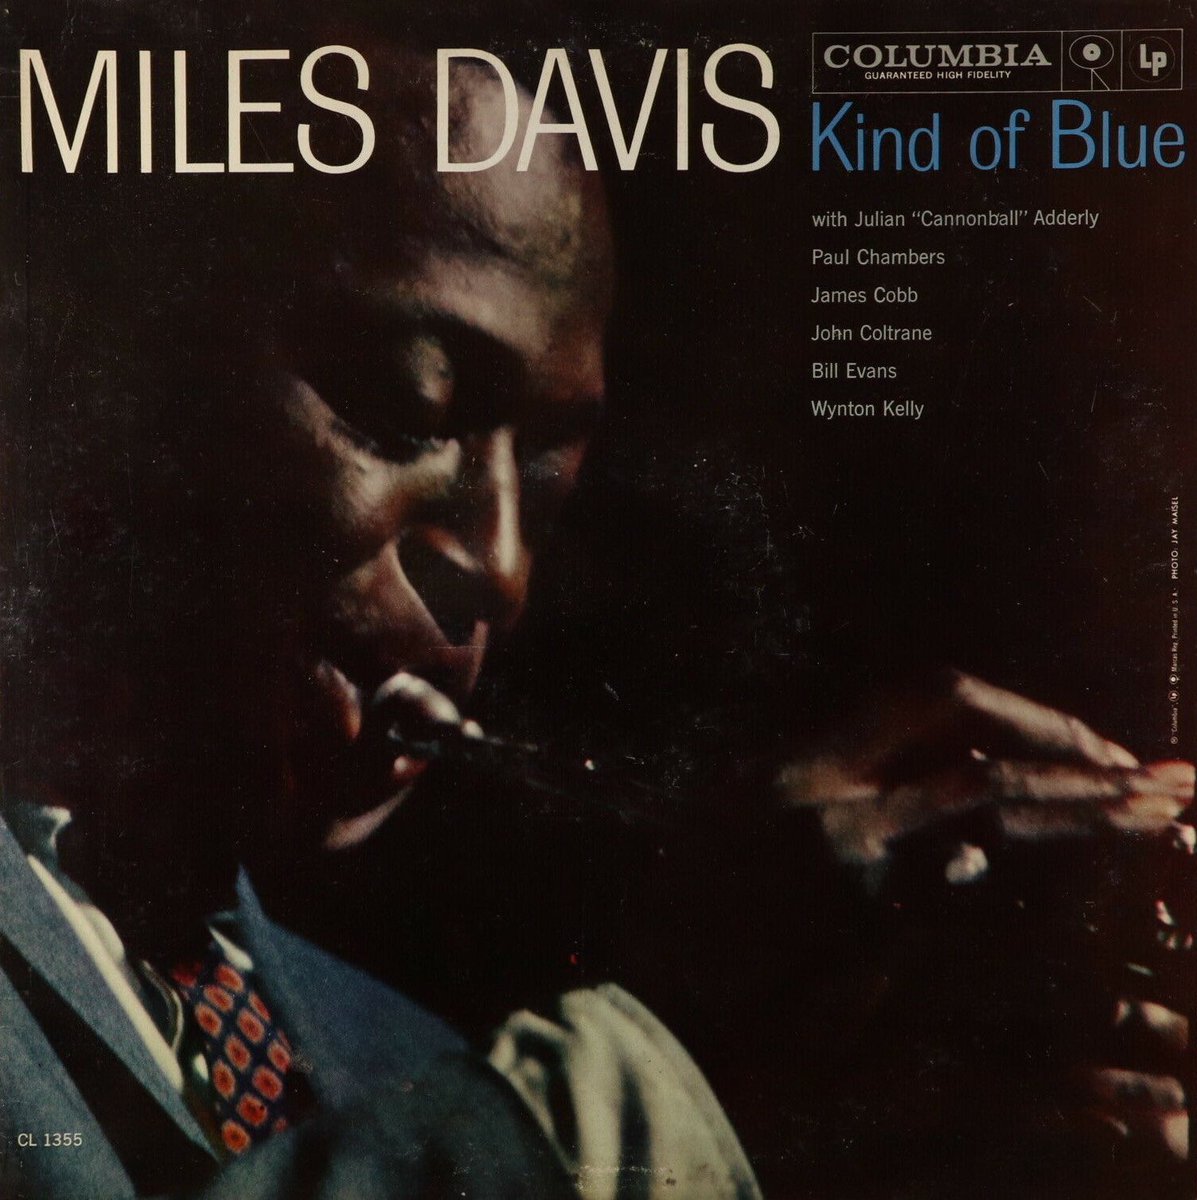 21. Miles Davis - Kind of Blue (1959)Genres: Modal Jazz, Cool JazzRating: ★★★½  12/23/18Note: I appreciate that it’s more melodic than most jazz records, and gets stuck in your head, but I still don’t understand what else sets it apart.